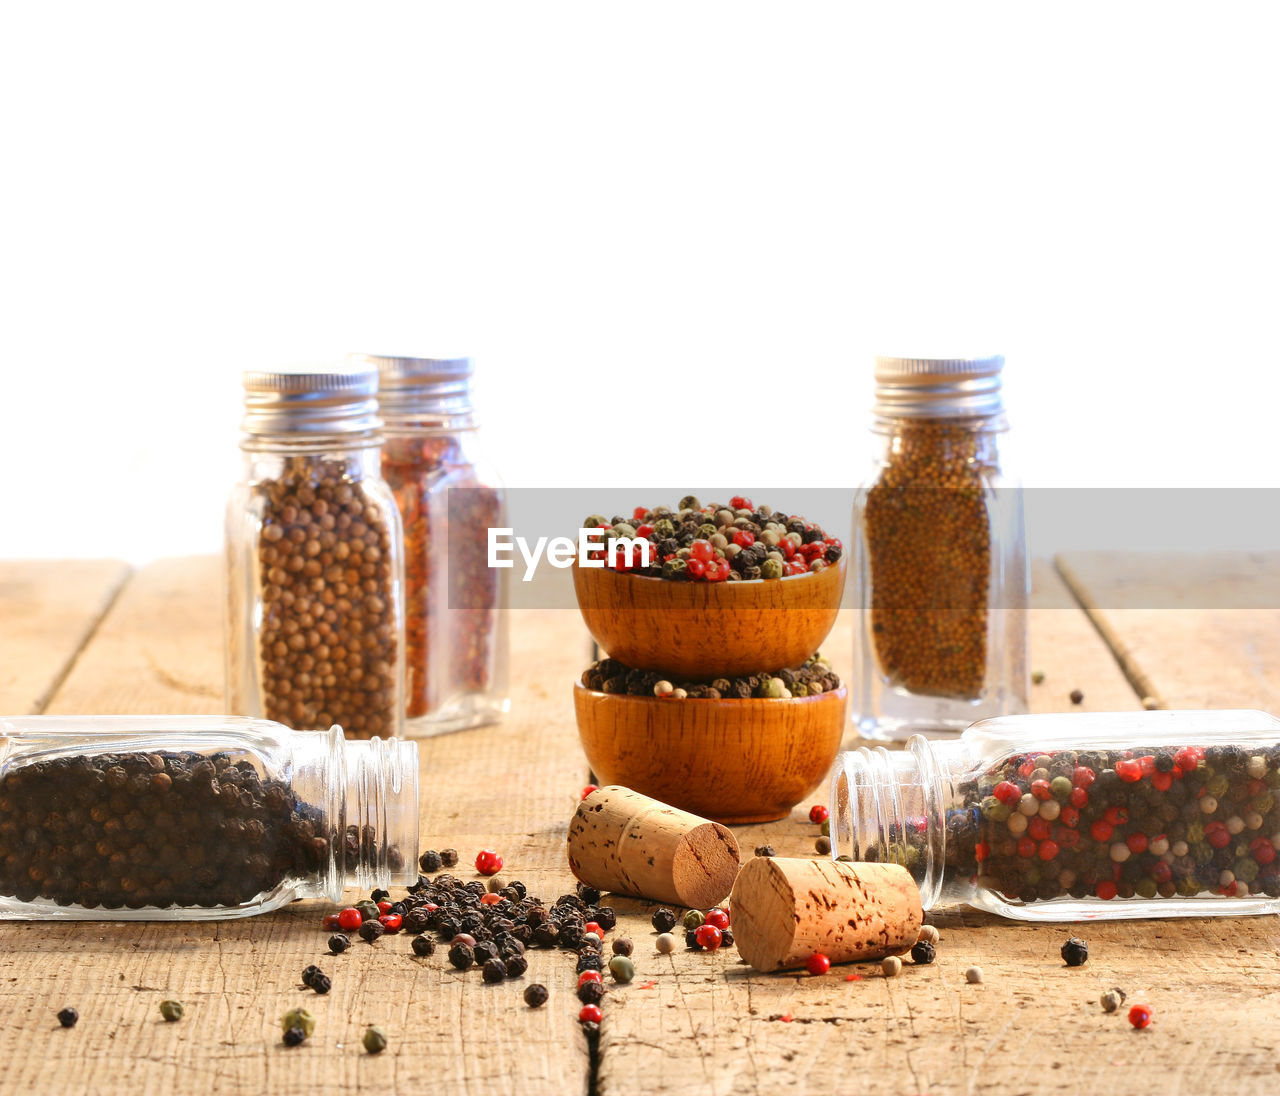 food and drink, food, healthy eating, container, spice, wellbeing, fruit, jar, seed, berry, spice mix, freshness, ingredient, no people, variation, wood, studio shot, condiment, indoors, organic, still life, nature, produce, cereal plant